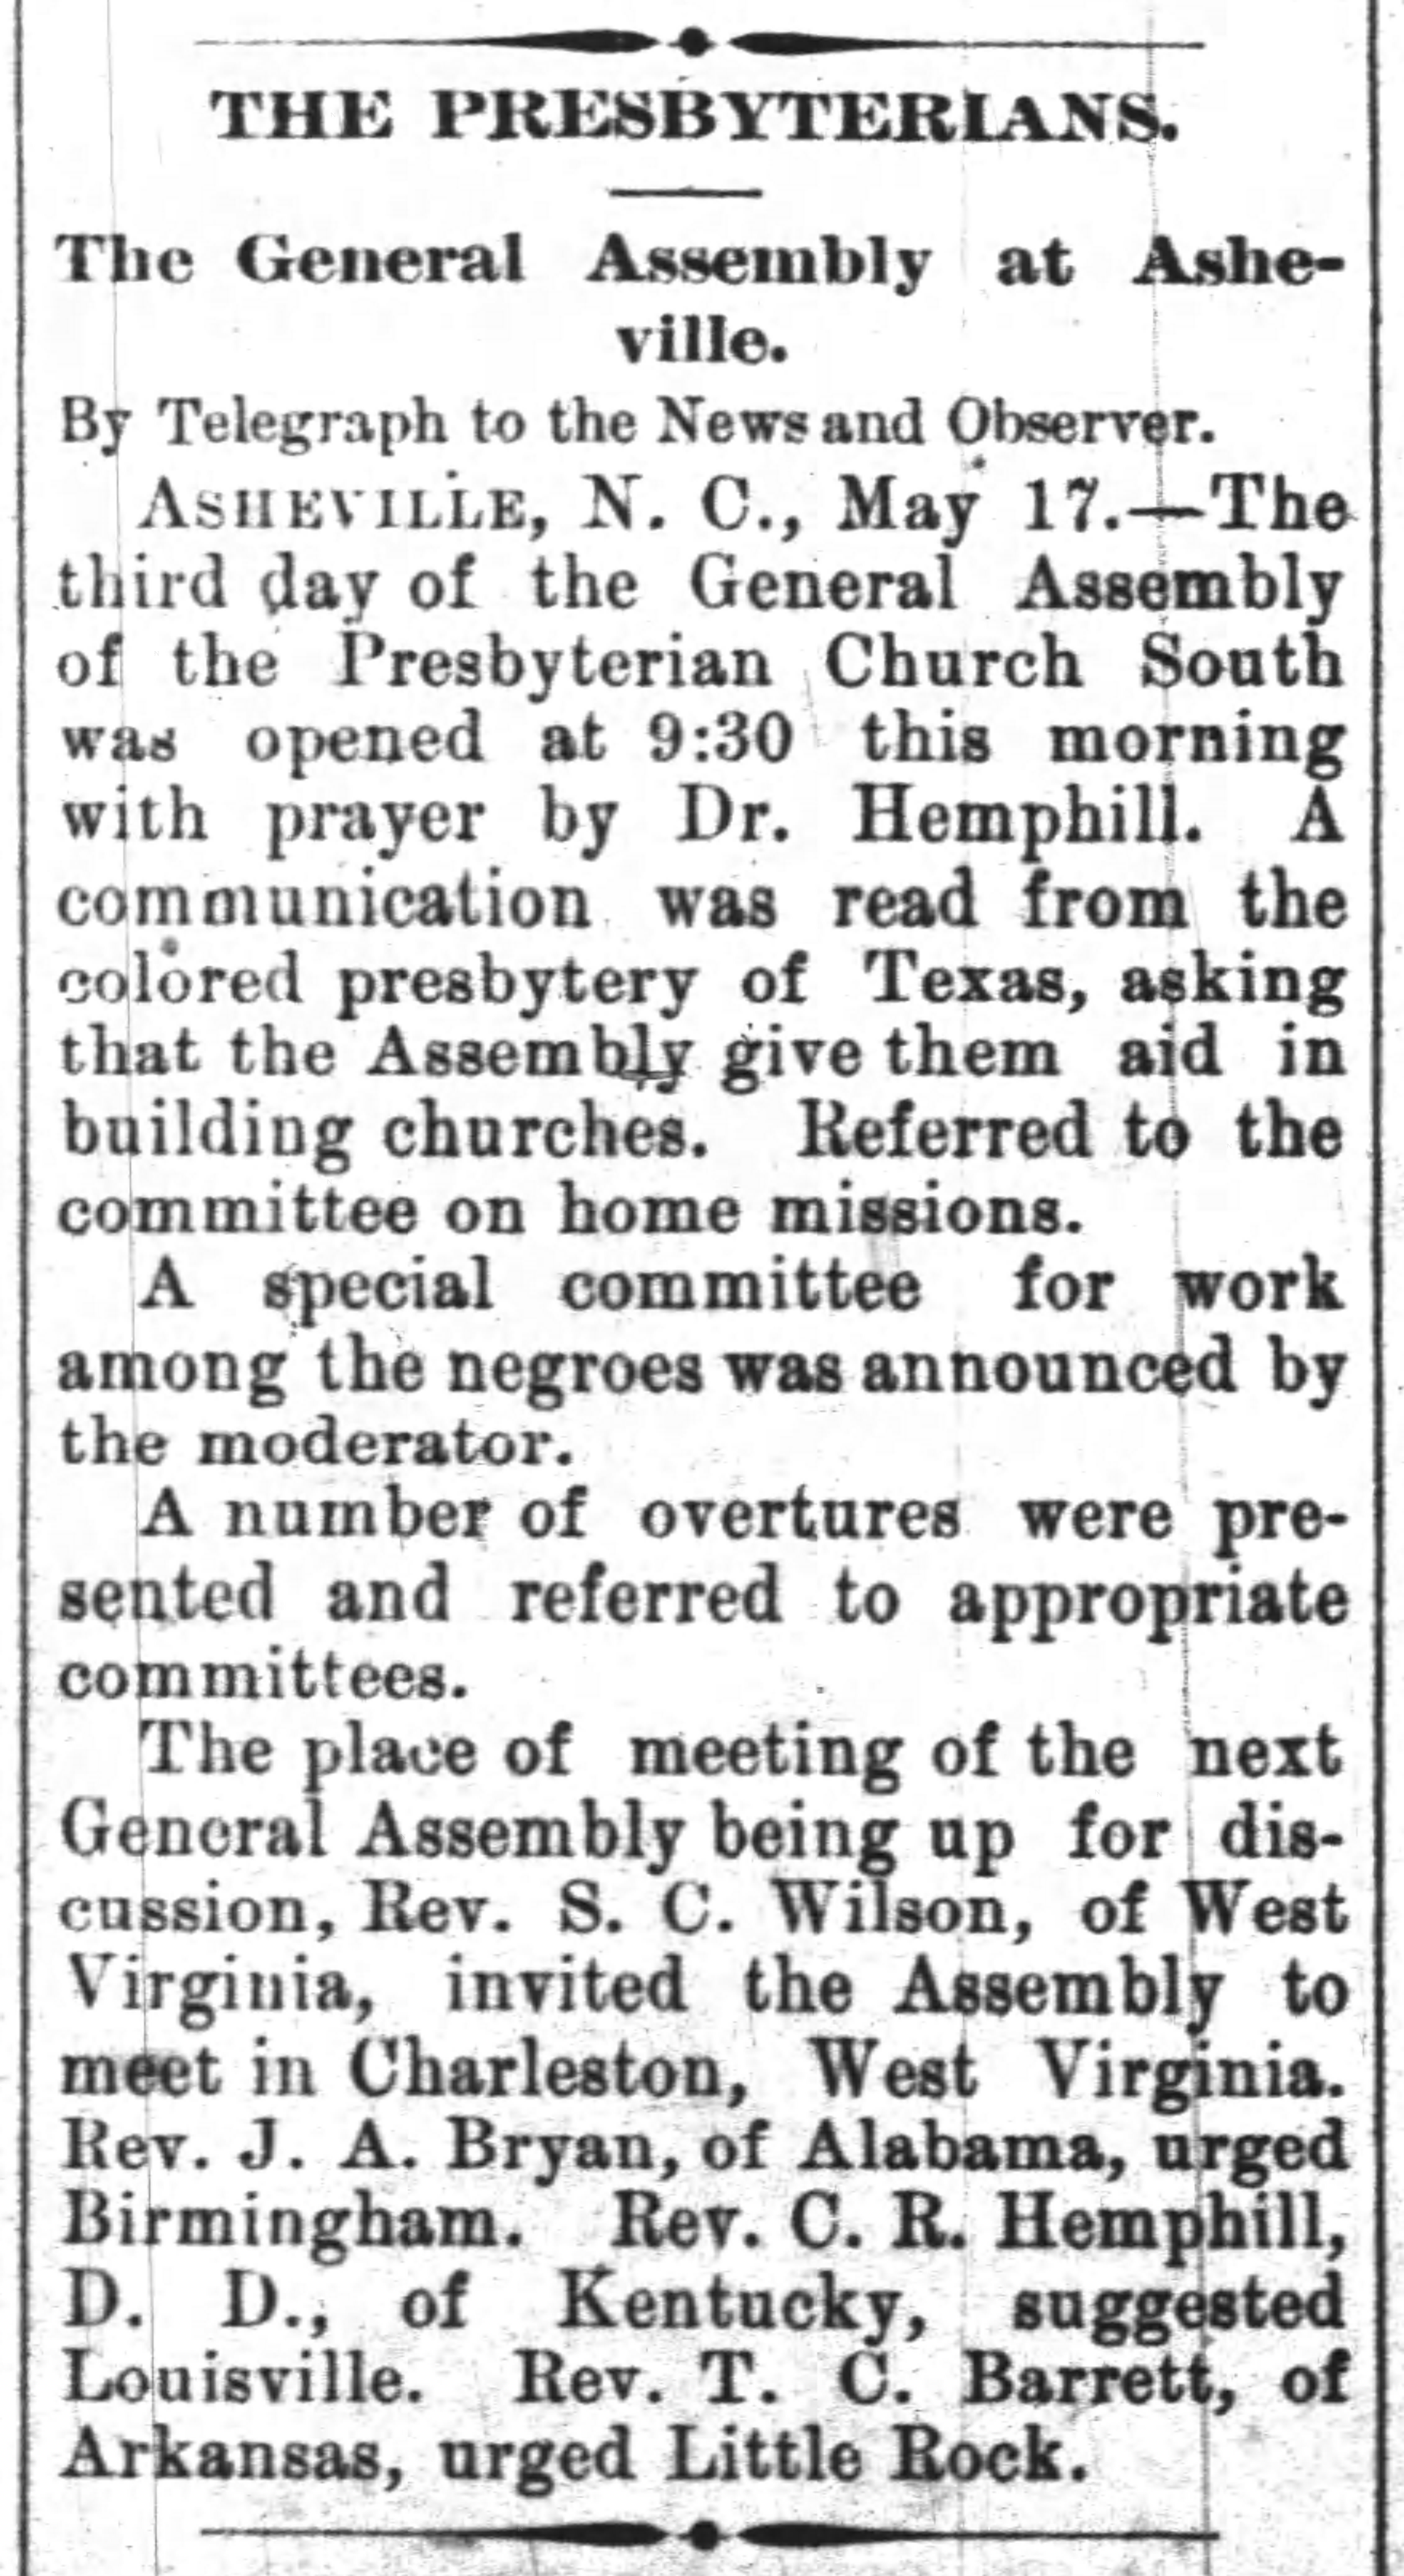 Presbyterians: The General Assembly at Asheville